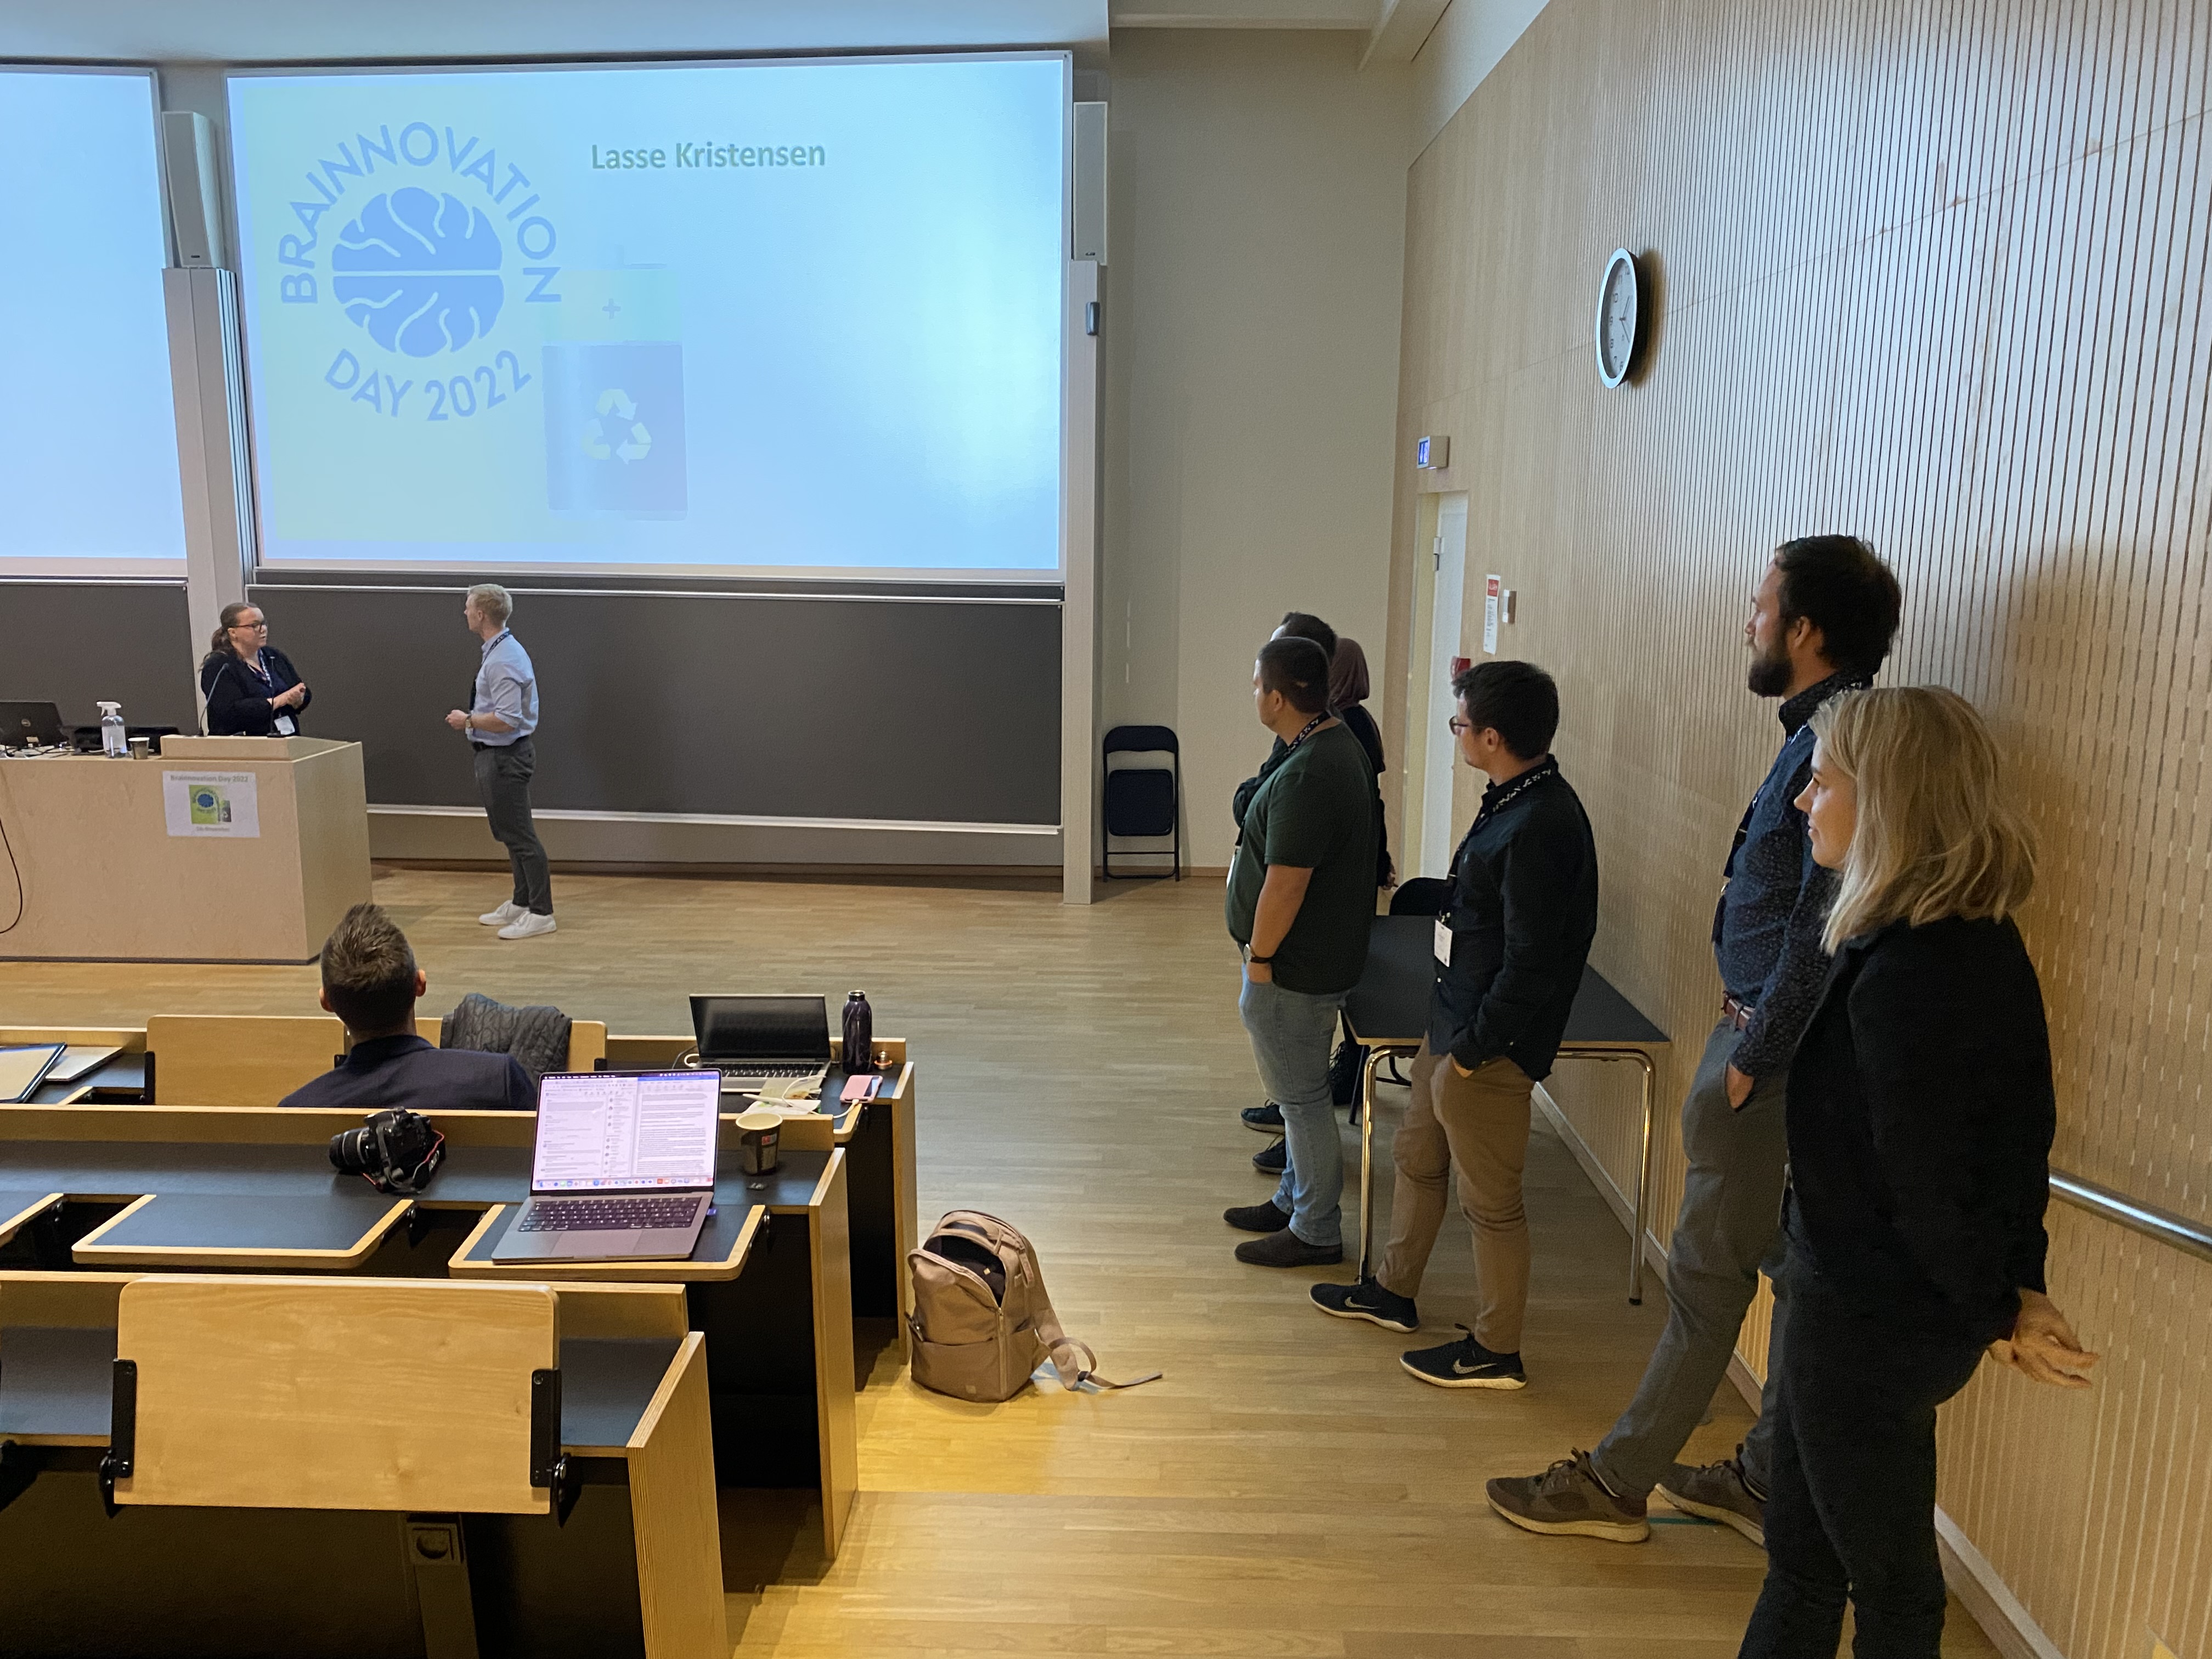 1 minute madness by students working solutions for better batteries. (Photo: Aarhus University)